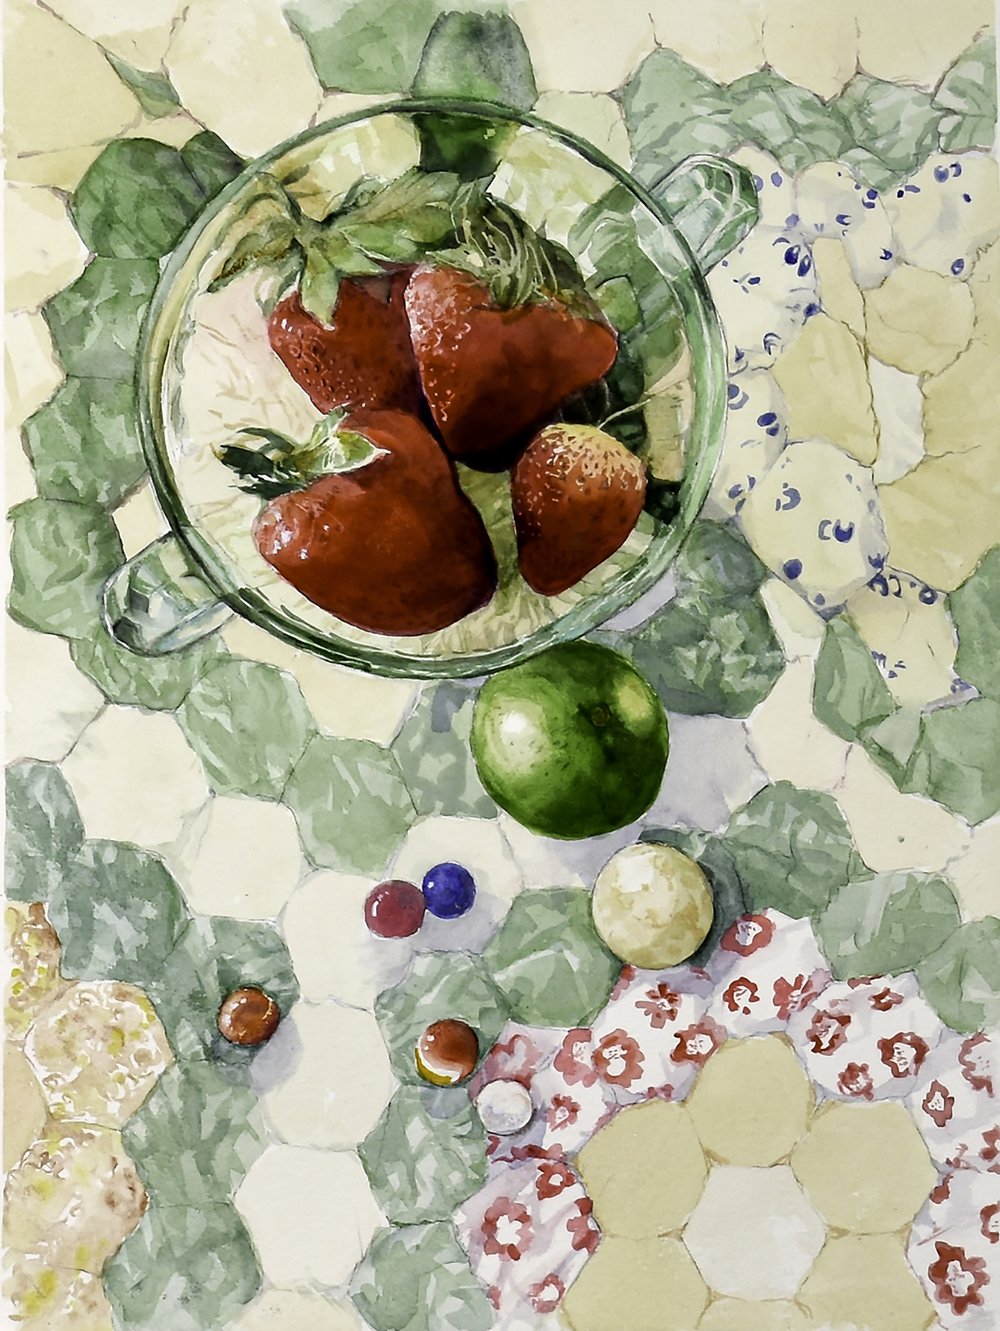 Paint strawberrys in two ways with watercolor paints and crayons, Anna  Krupa